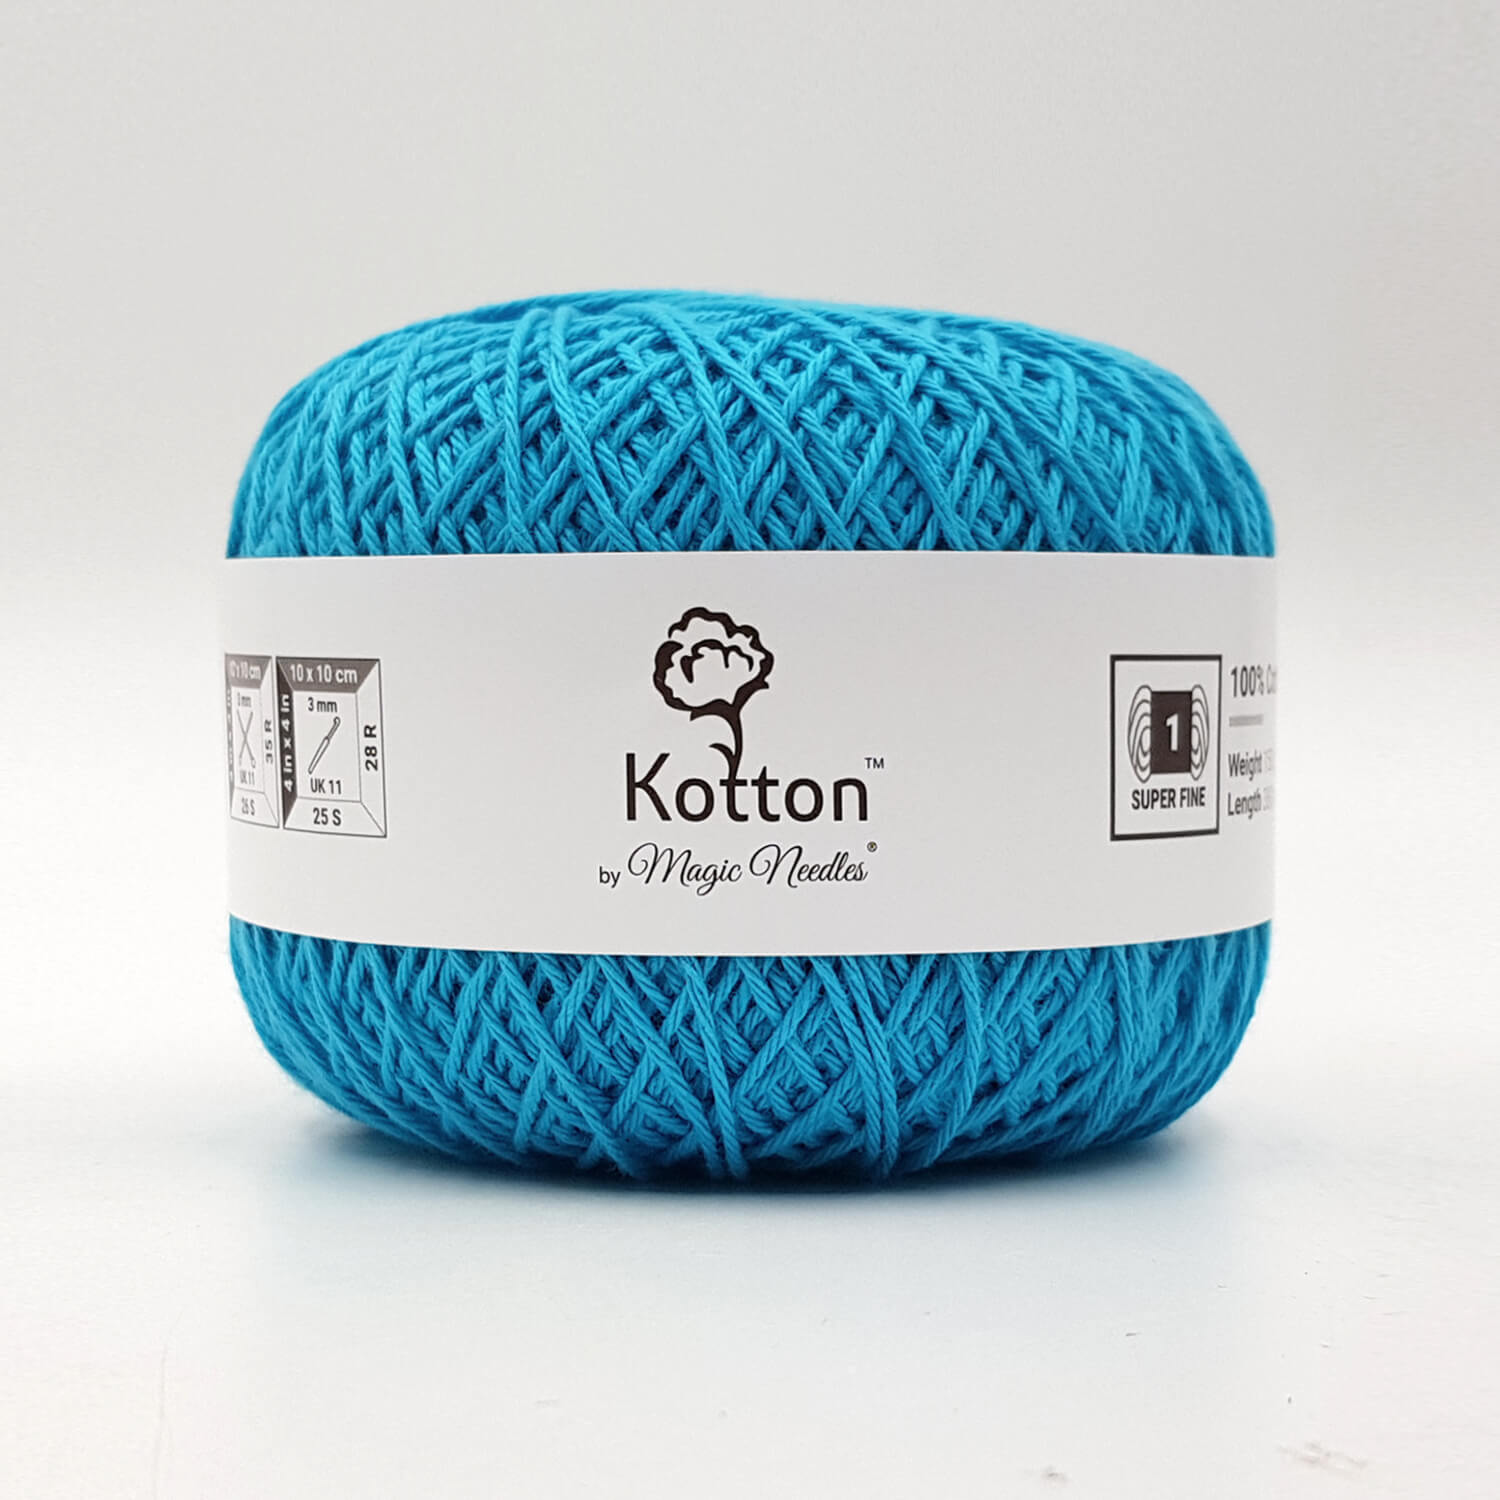 Cotton Yarn by Kotton - 4 ply - Turquoise Blue 56